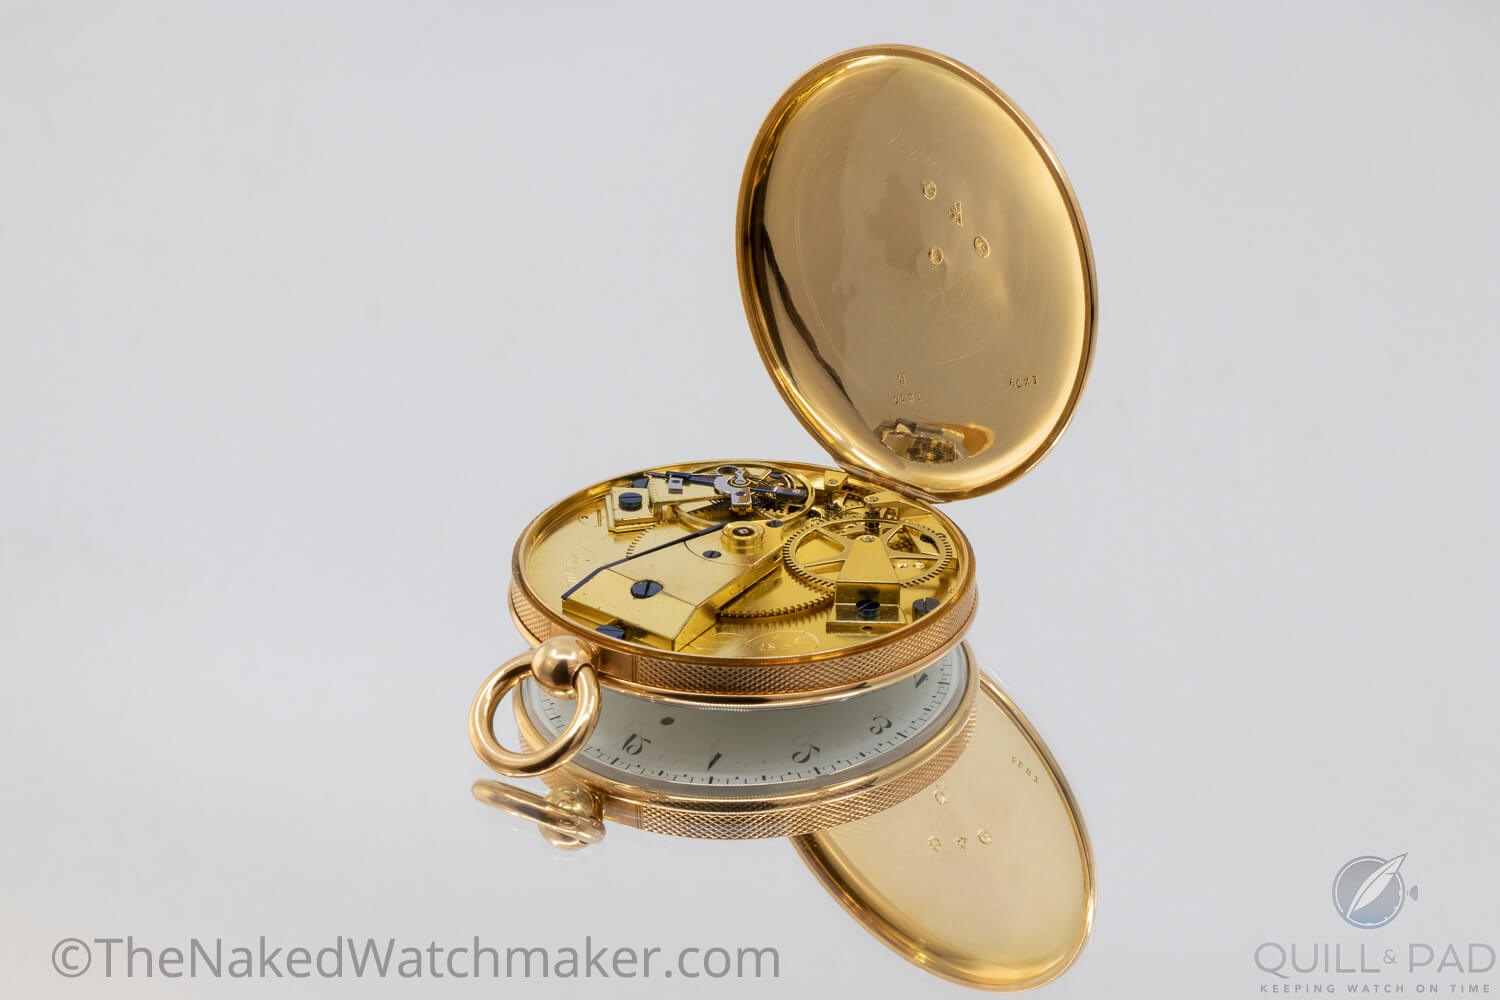 Frosted finishing throughout the movement of the Abraham-Louis Breguet Souscription Pocket Watch